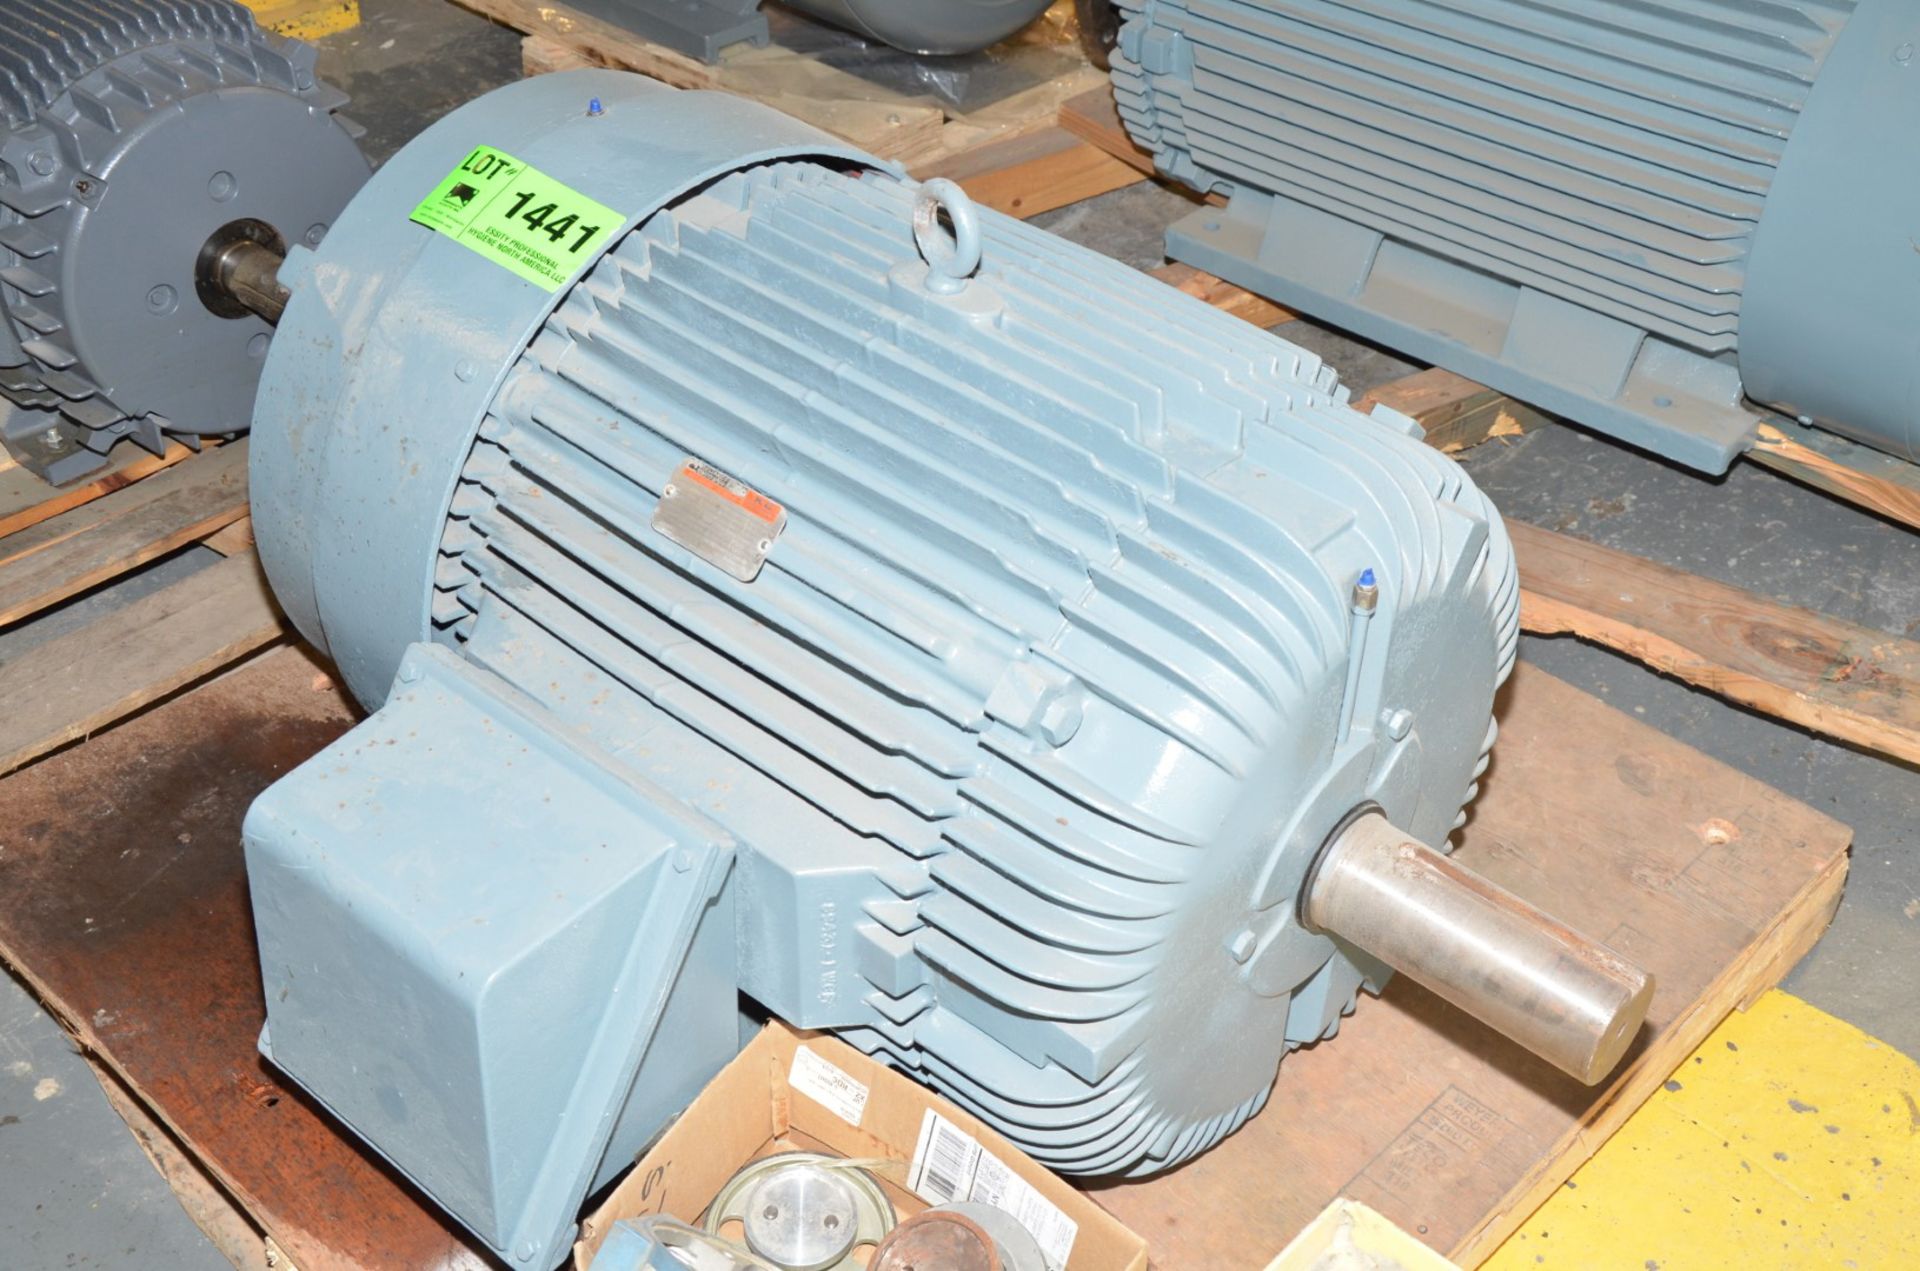 GE 125 HP 1785 RPM 460V ELECTRIC MOTOR [RIGGING FEE FOR LOT #1441 - $50 USD PLUS APPLICABLE TAXES] - Image 2 of 3